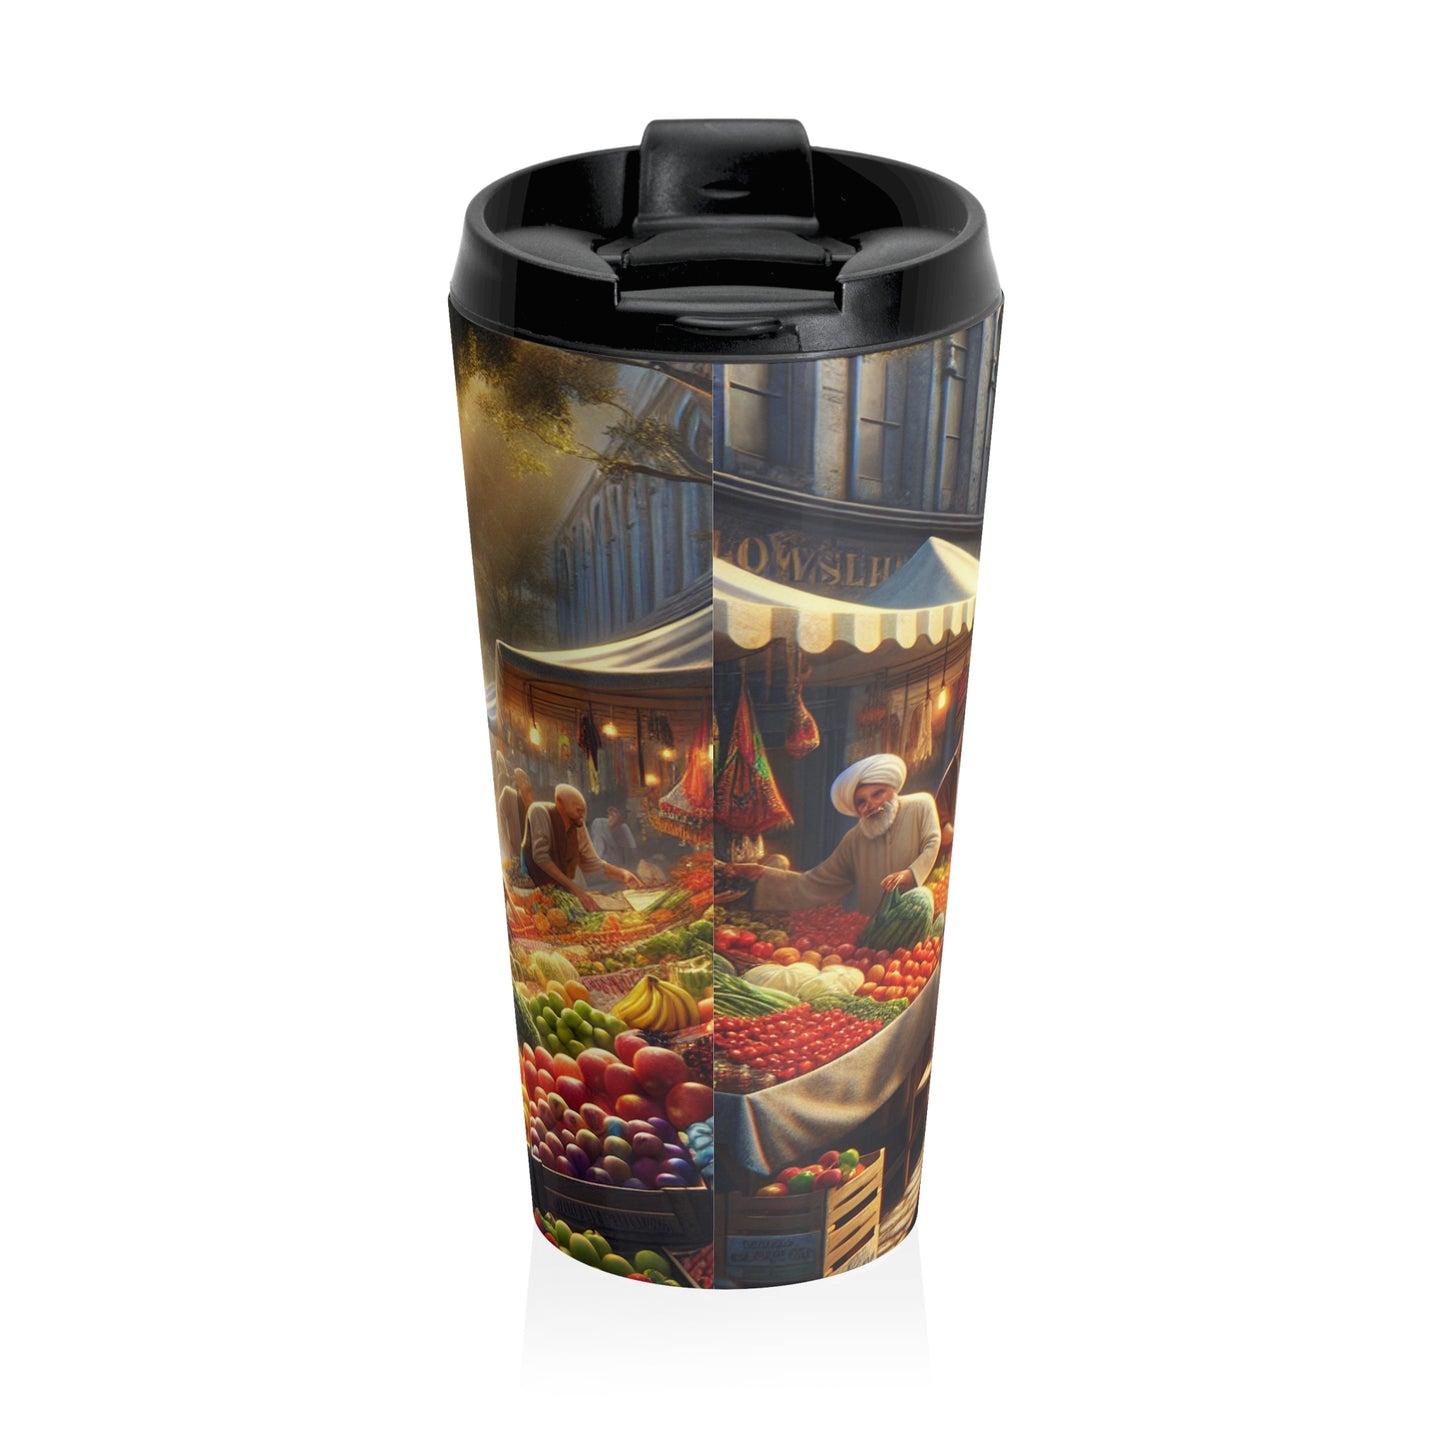 "Sunny Vibes at the Outdoor Market" - The Alien Stainless Steel Travel Mug Realism Style